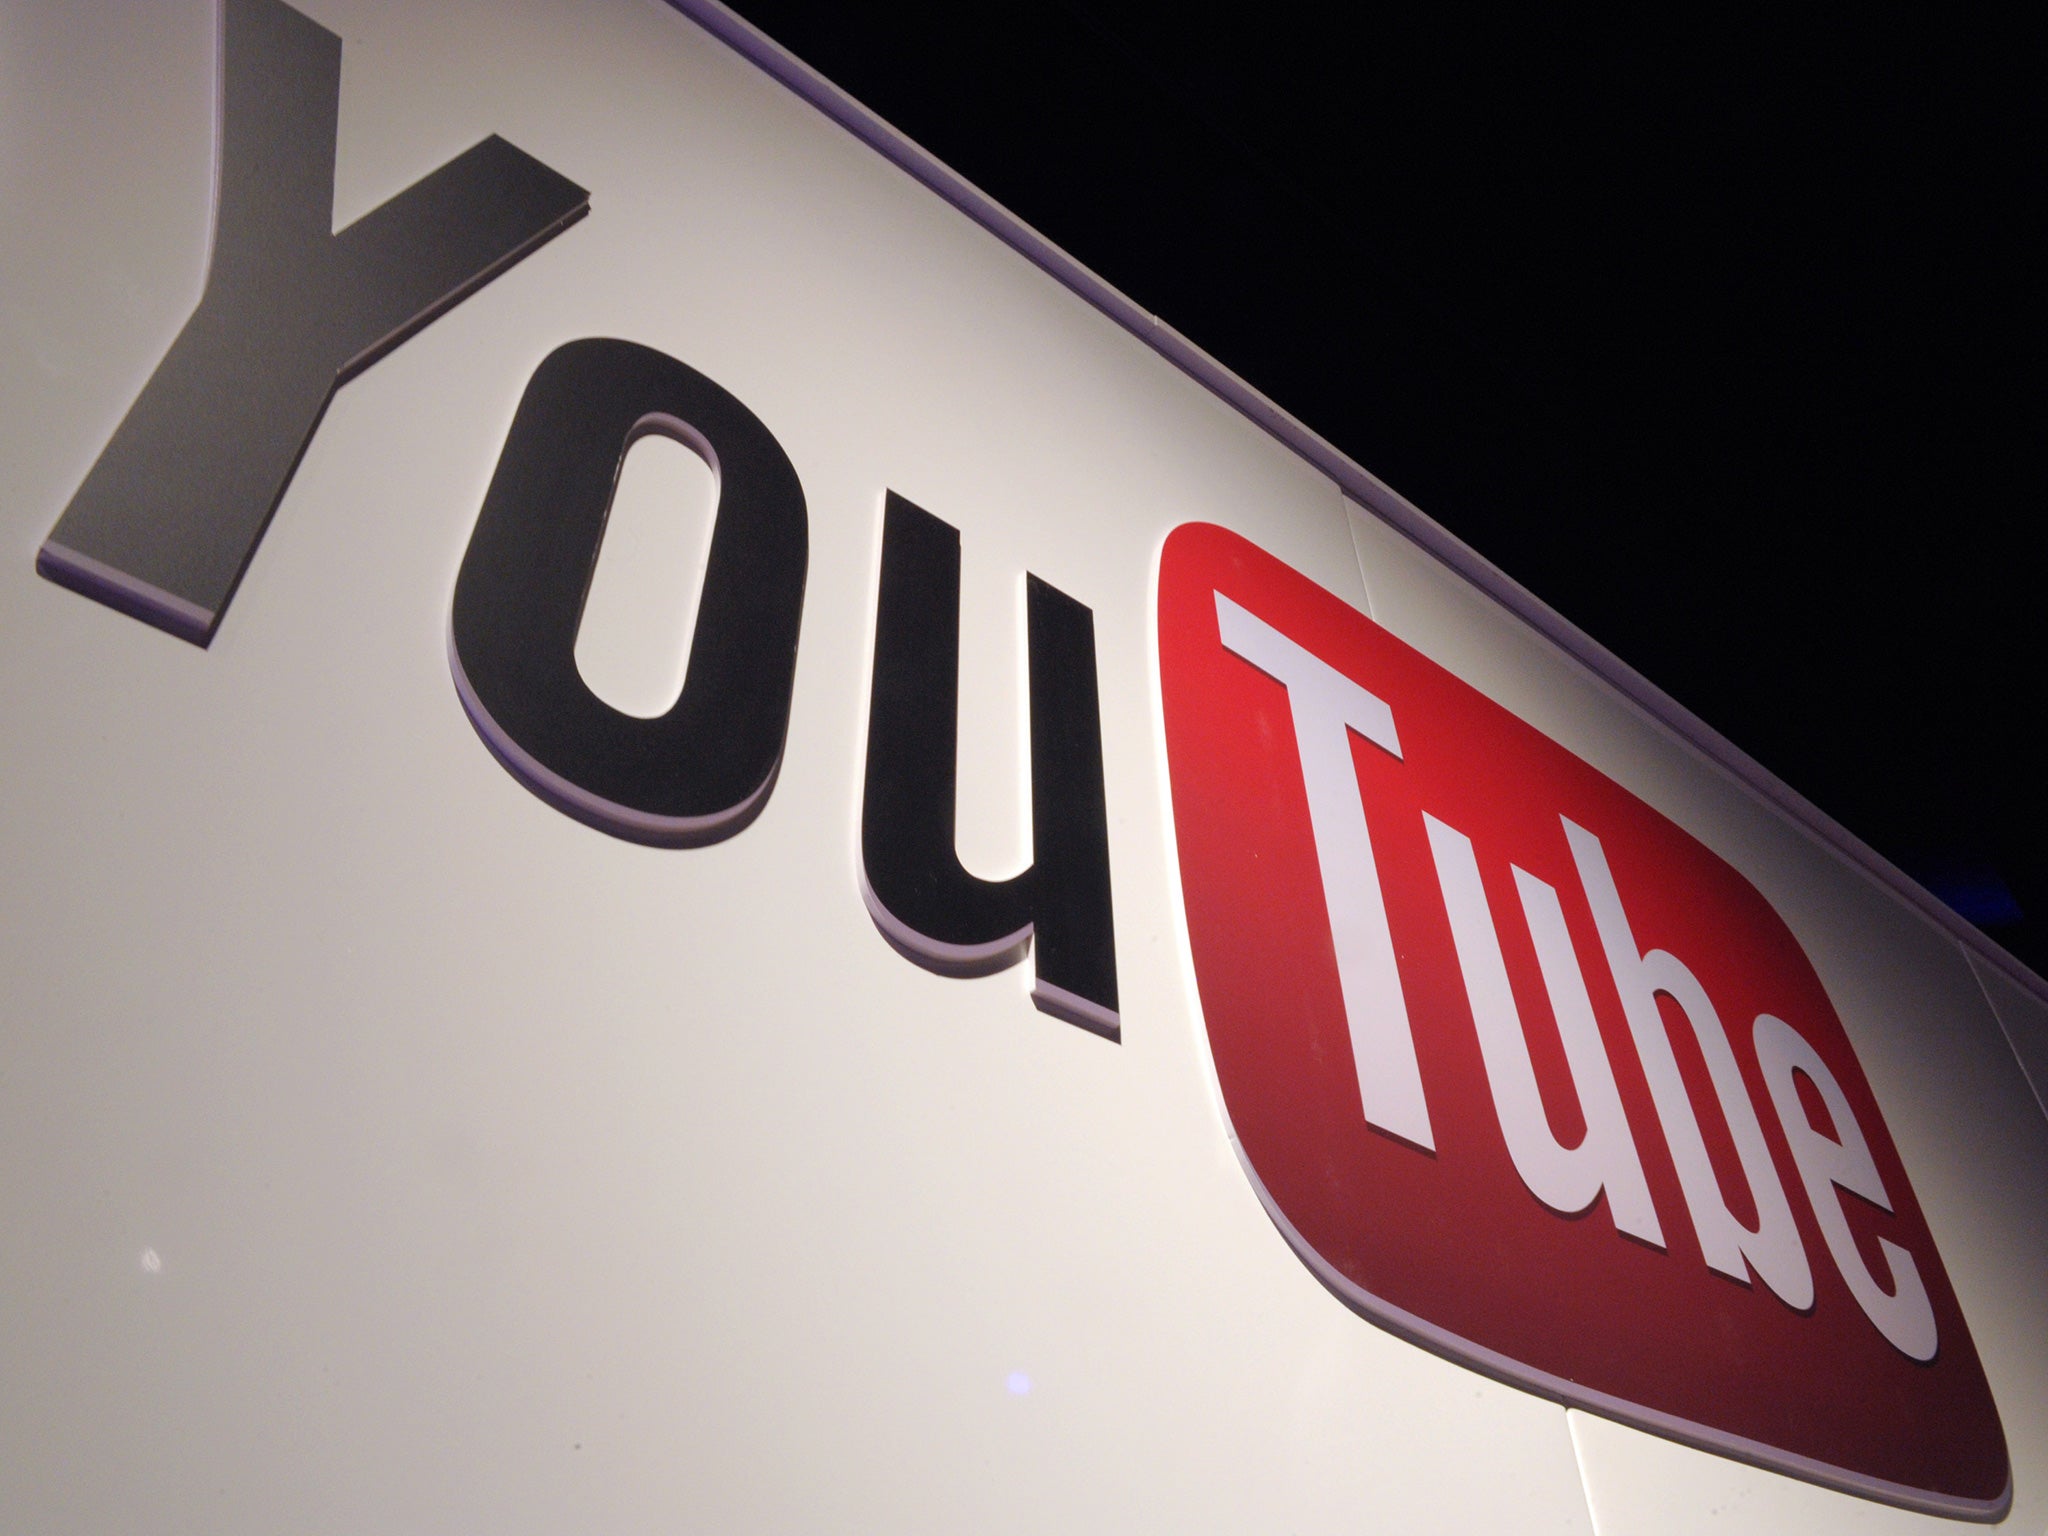 YouTube Red will cost users $9.99 a month